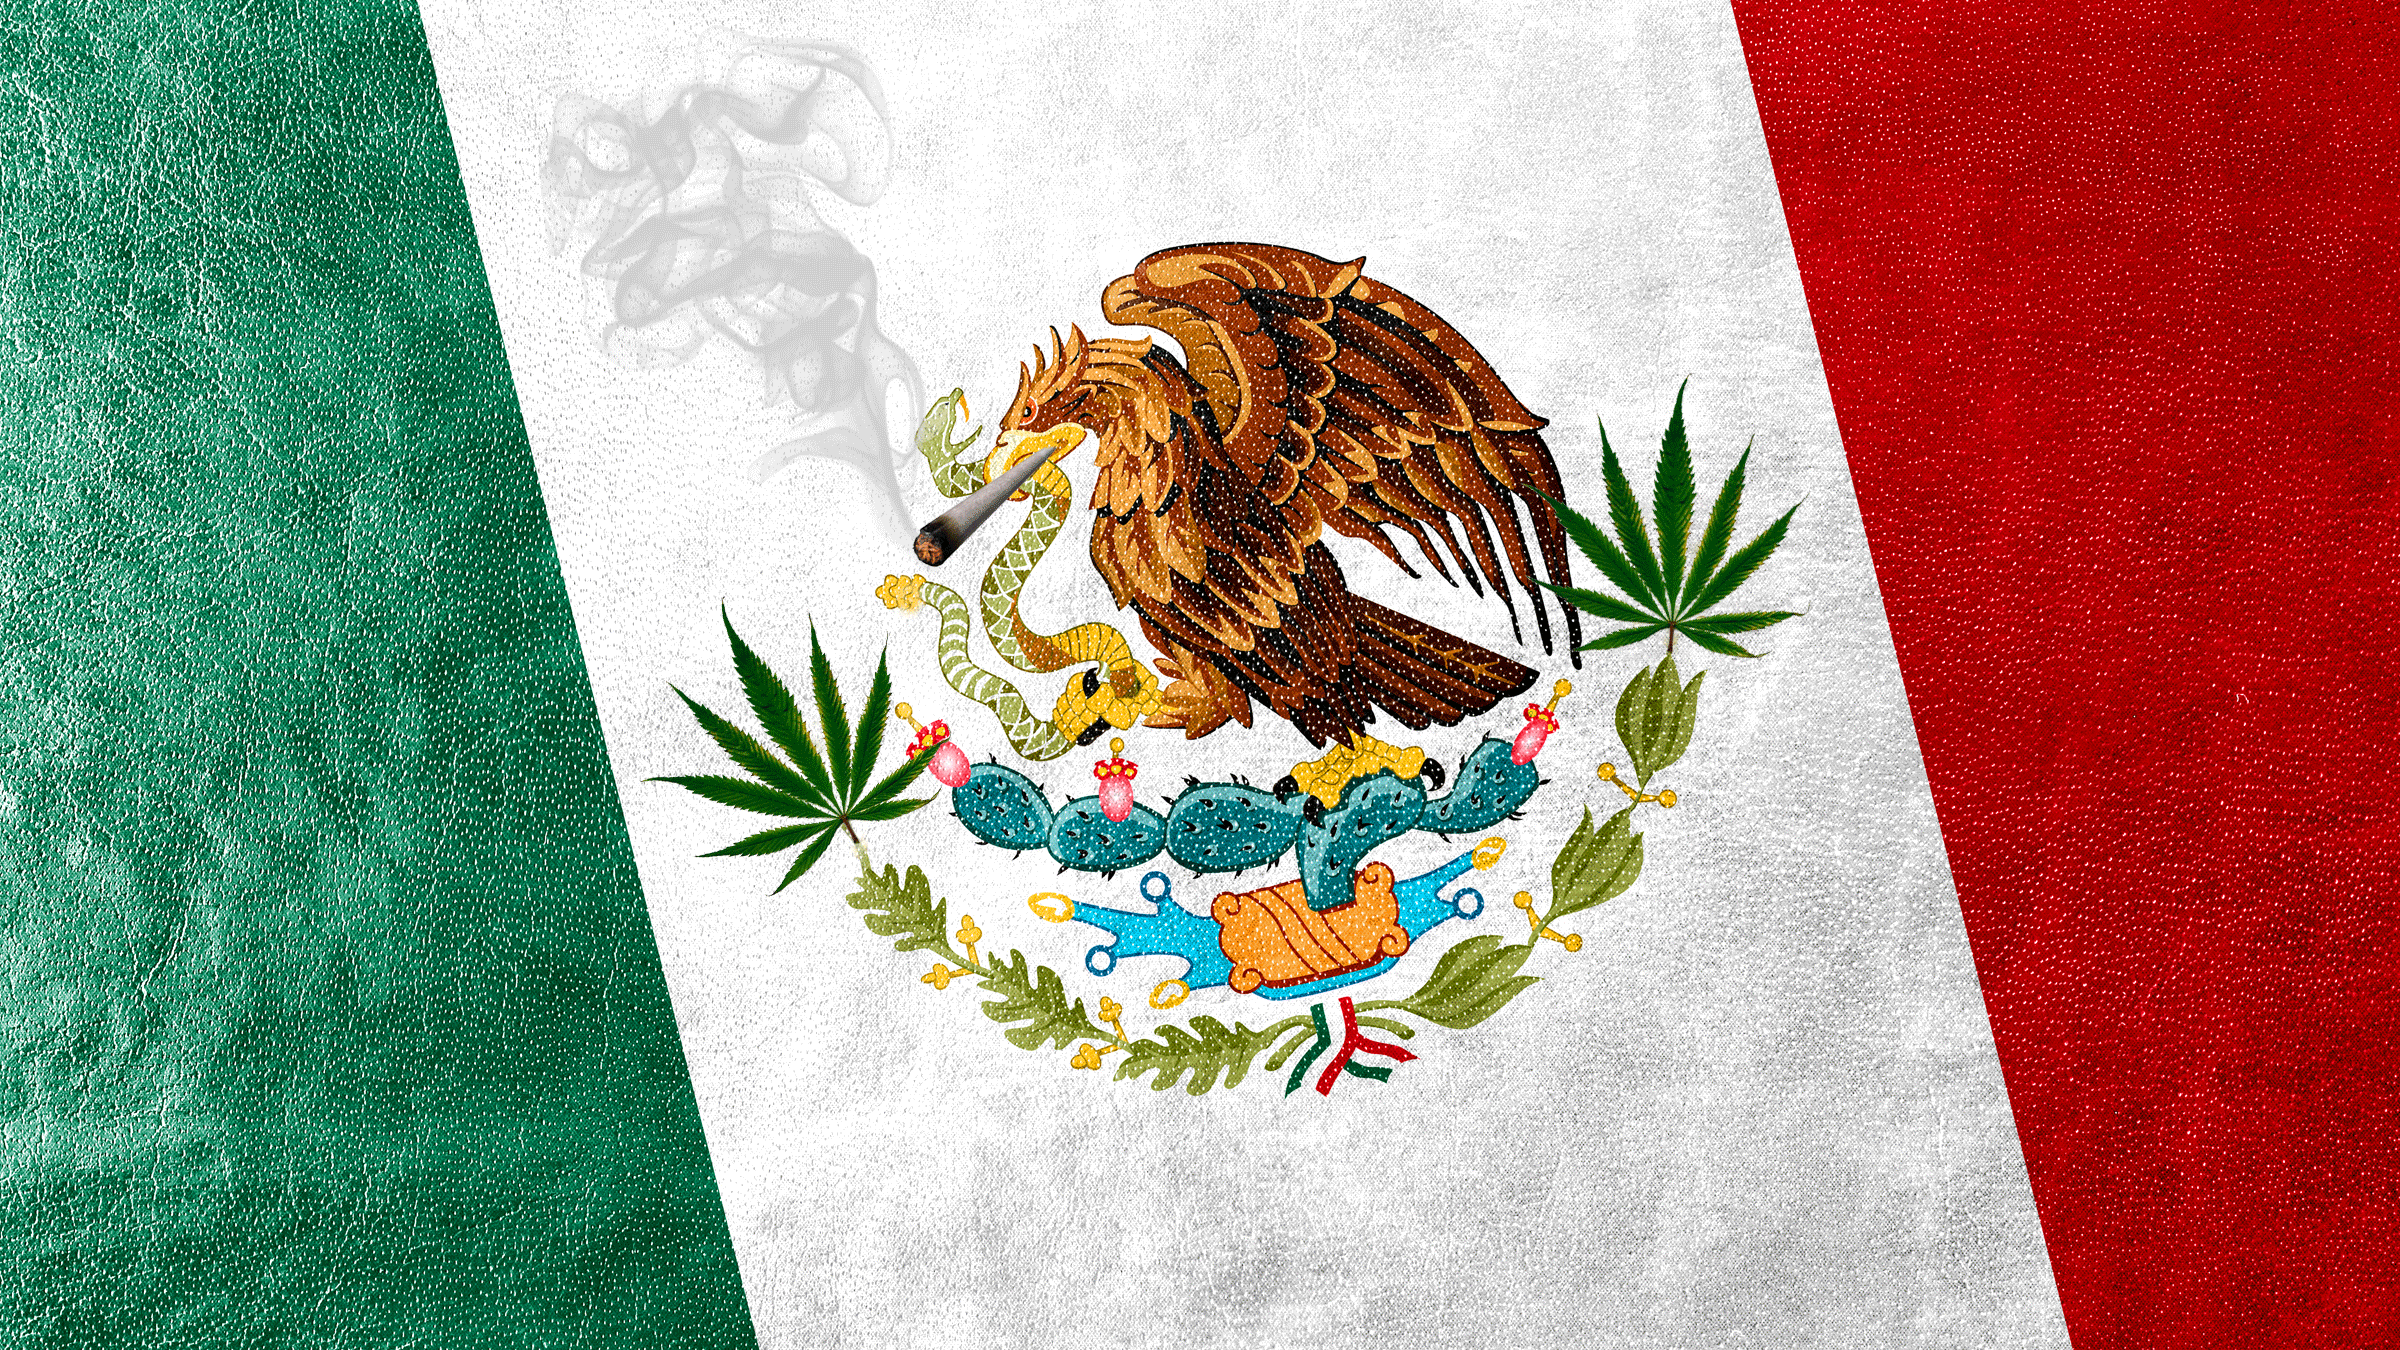 Drug Cartels Are Already Looking for Ways to Dominate Mexico’s Adult-Use Weed Industry